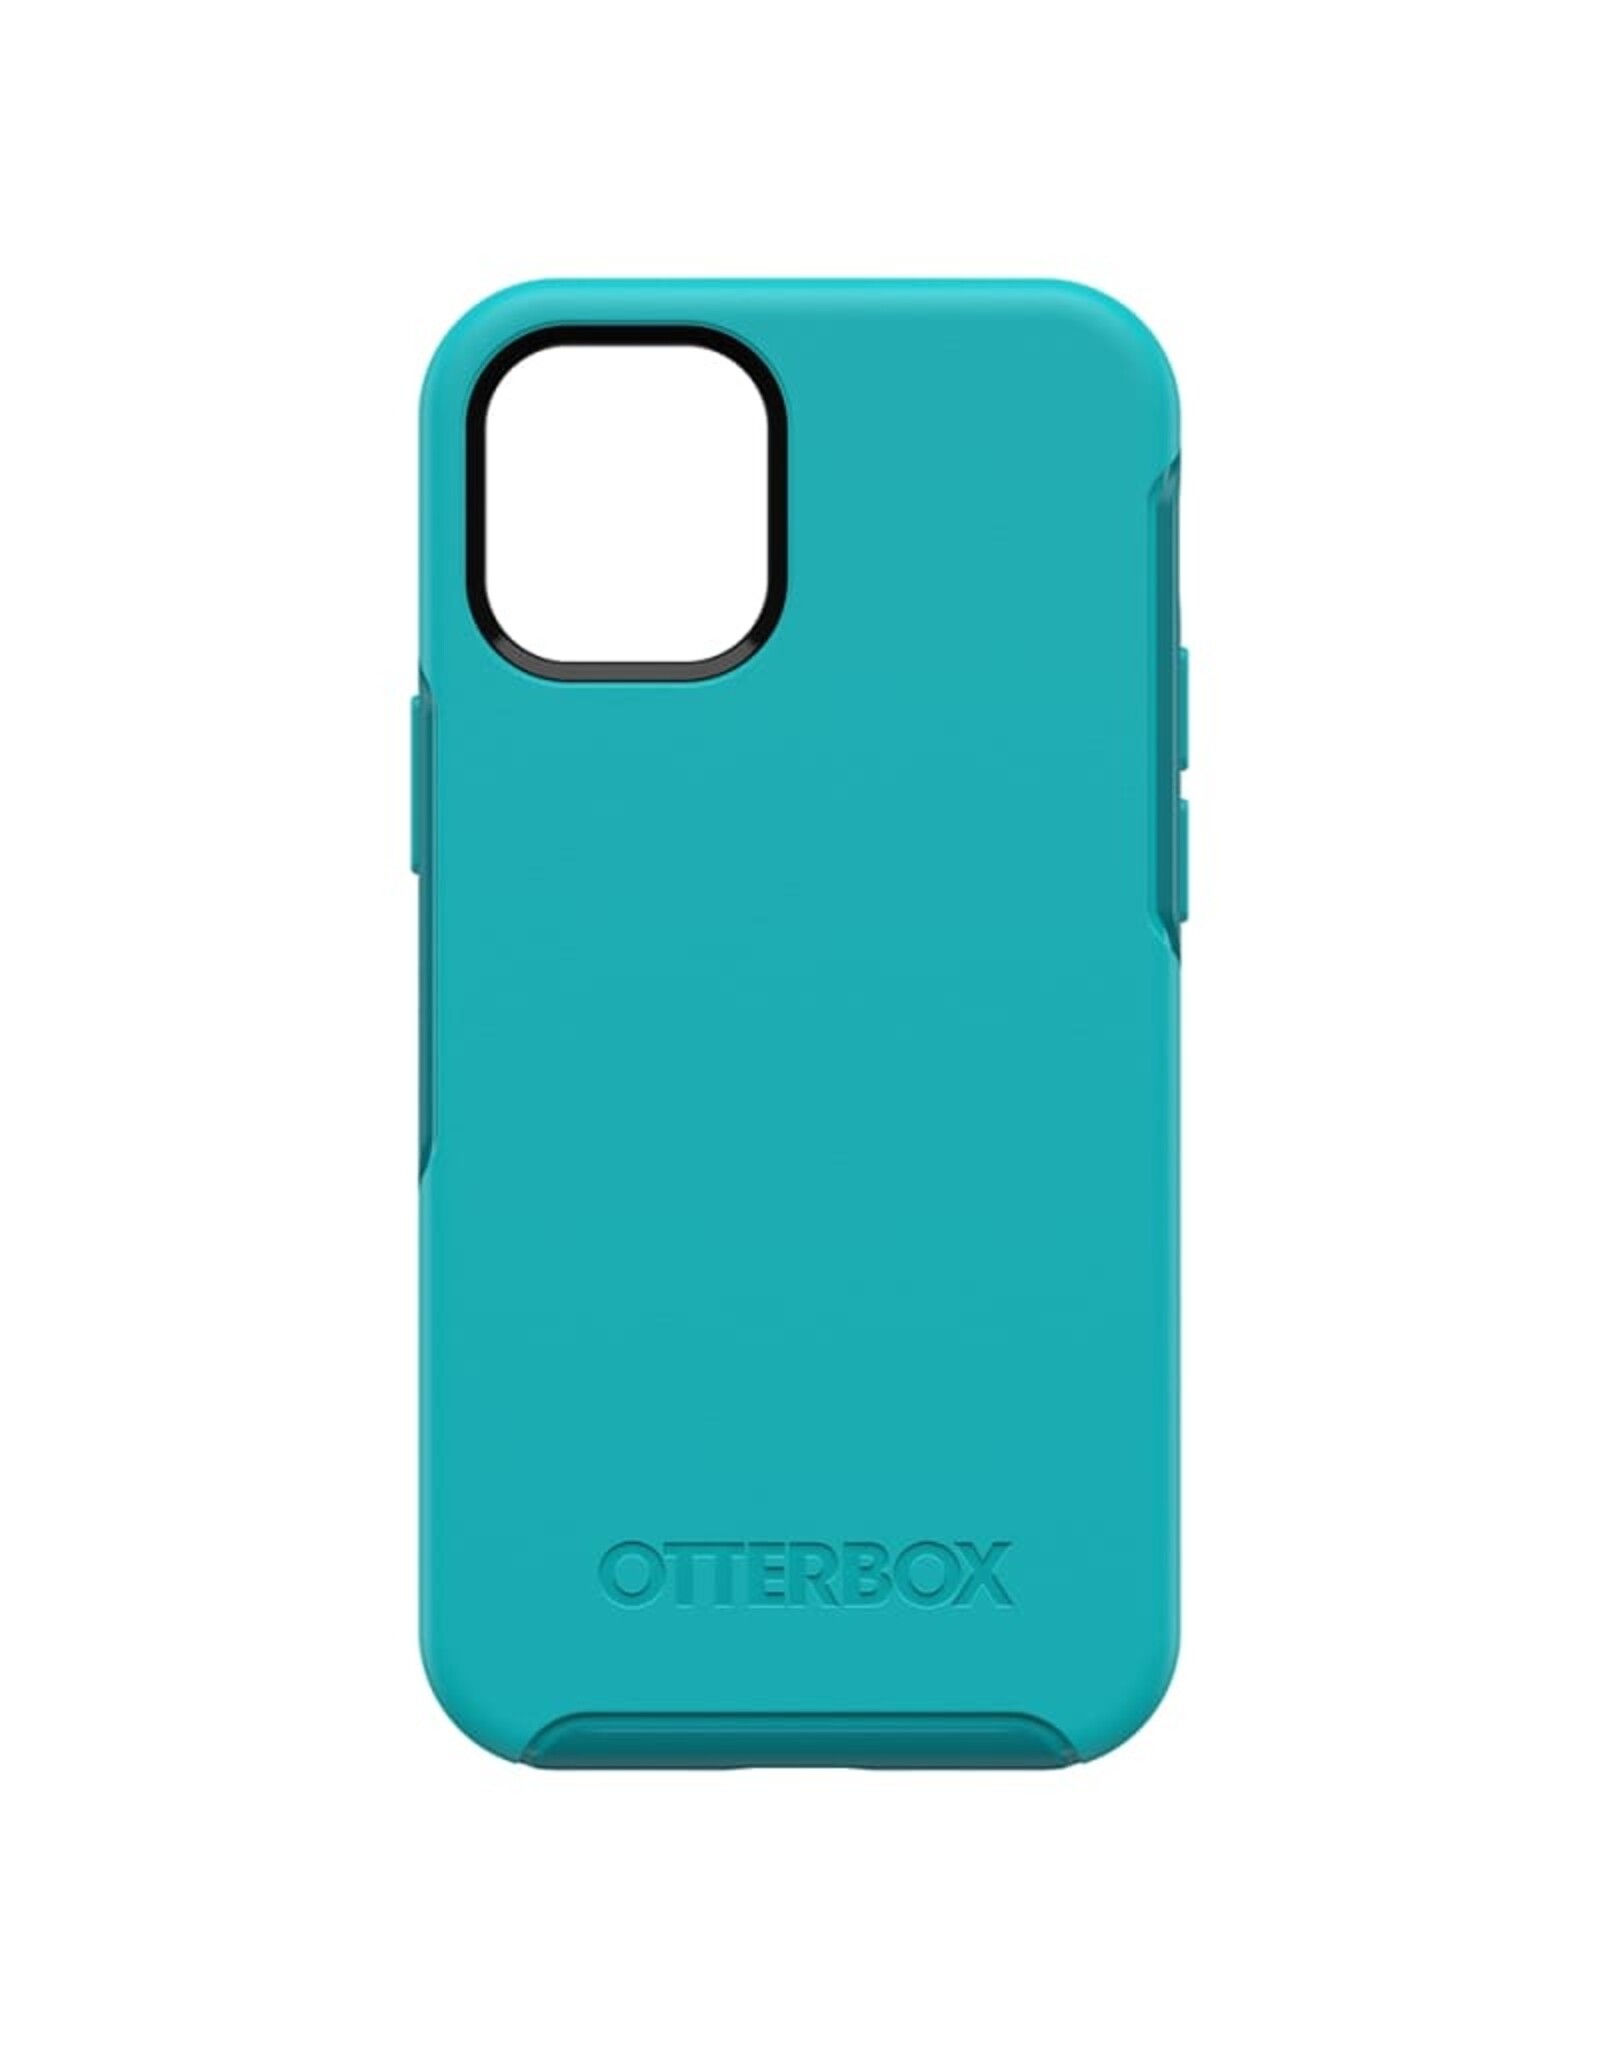 Otterbox OtterBox Symmetry Series Case For iPhone 12 mini - Rock Candy